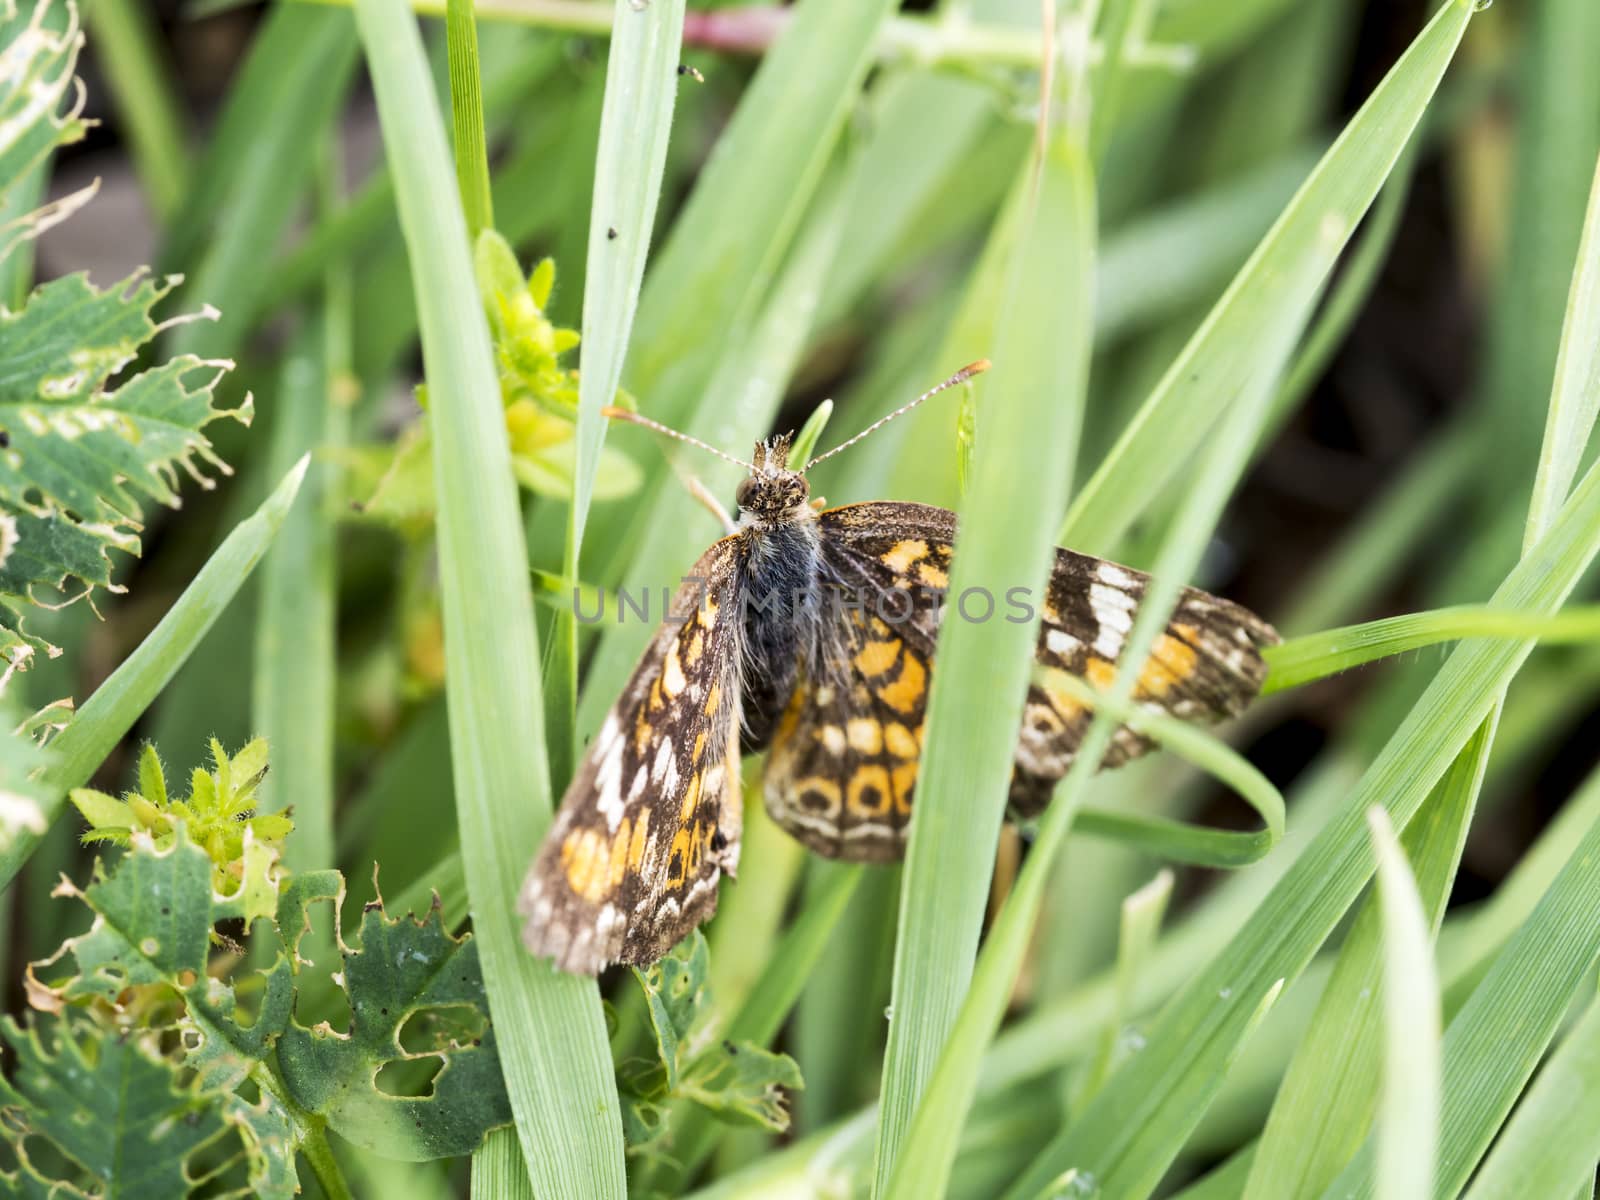 A Moth In The Grass by leieng